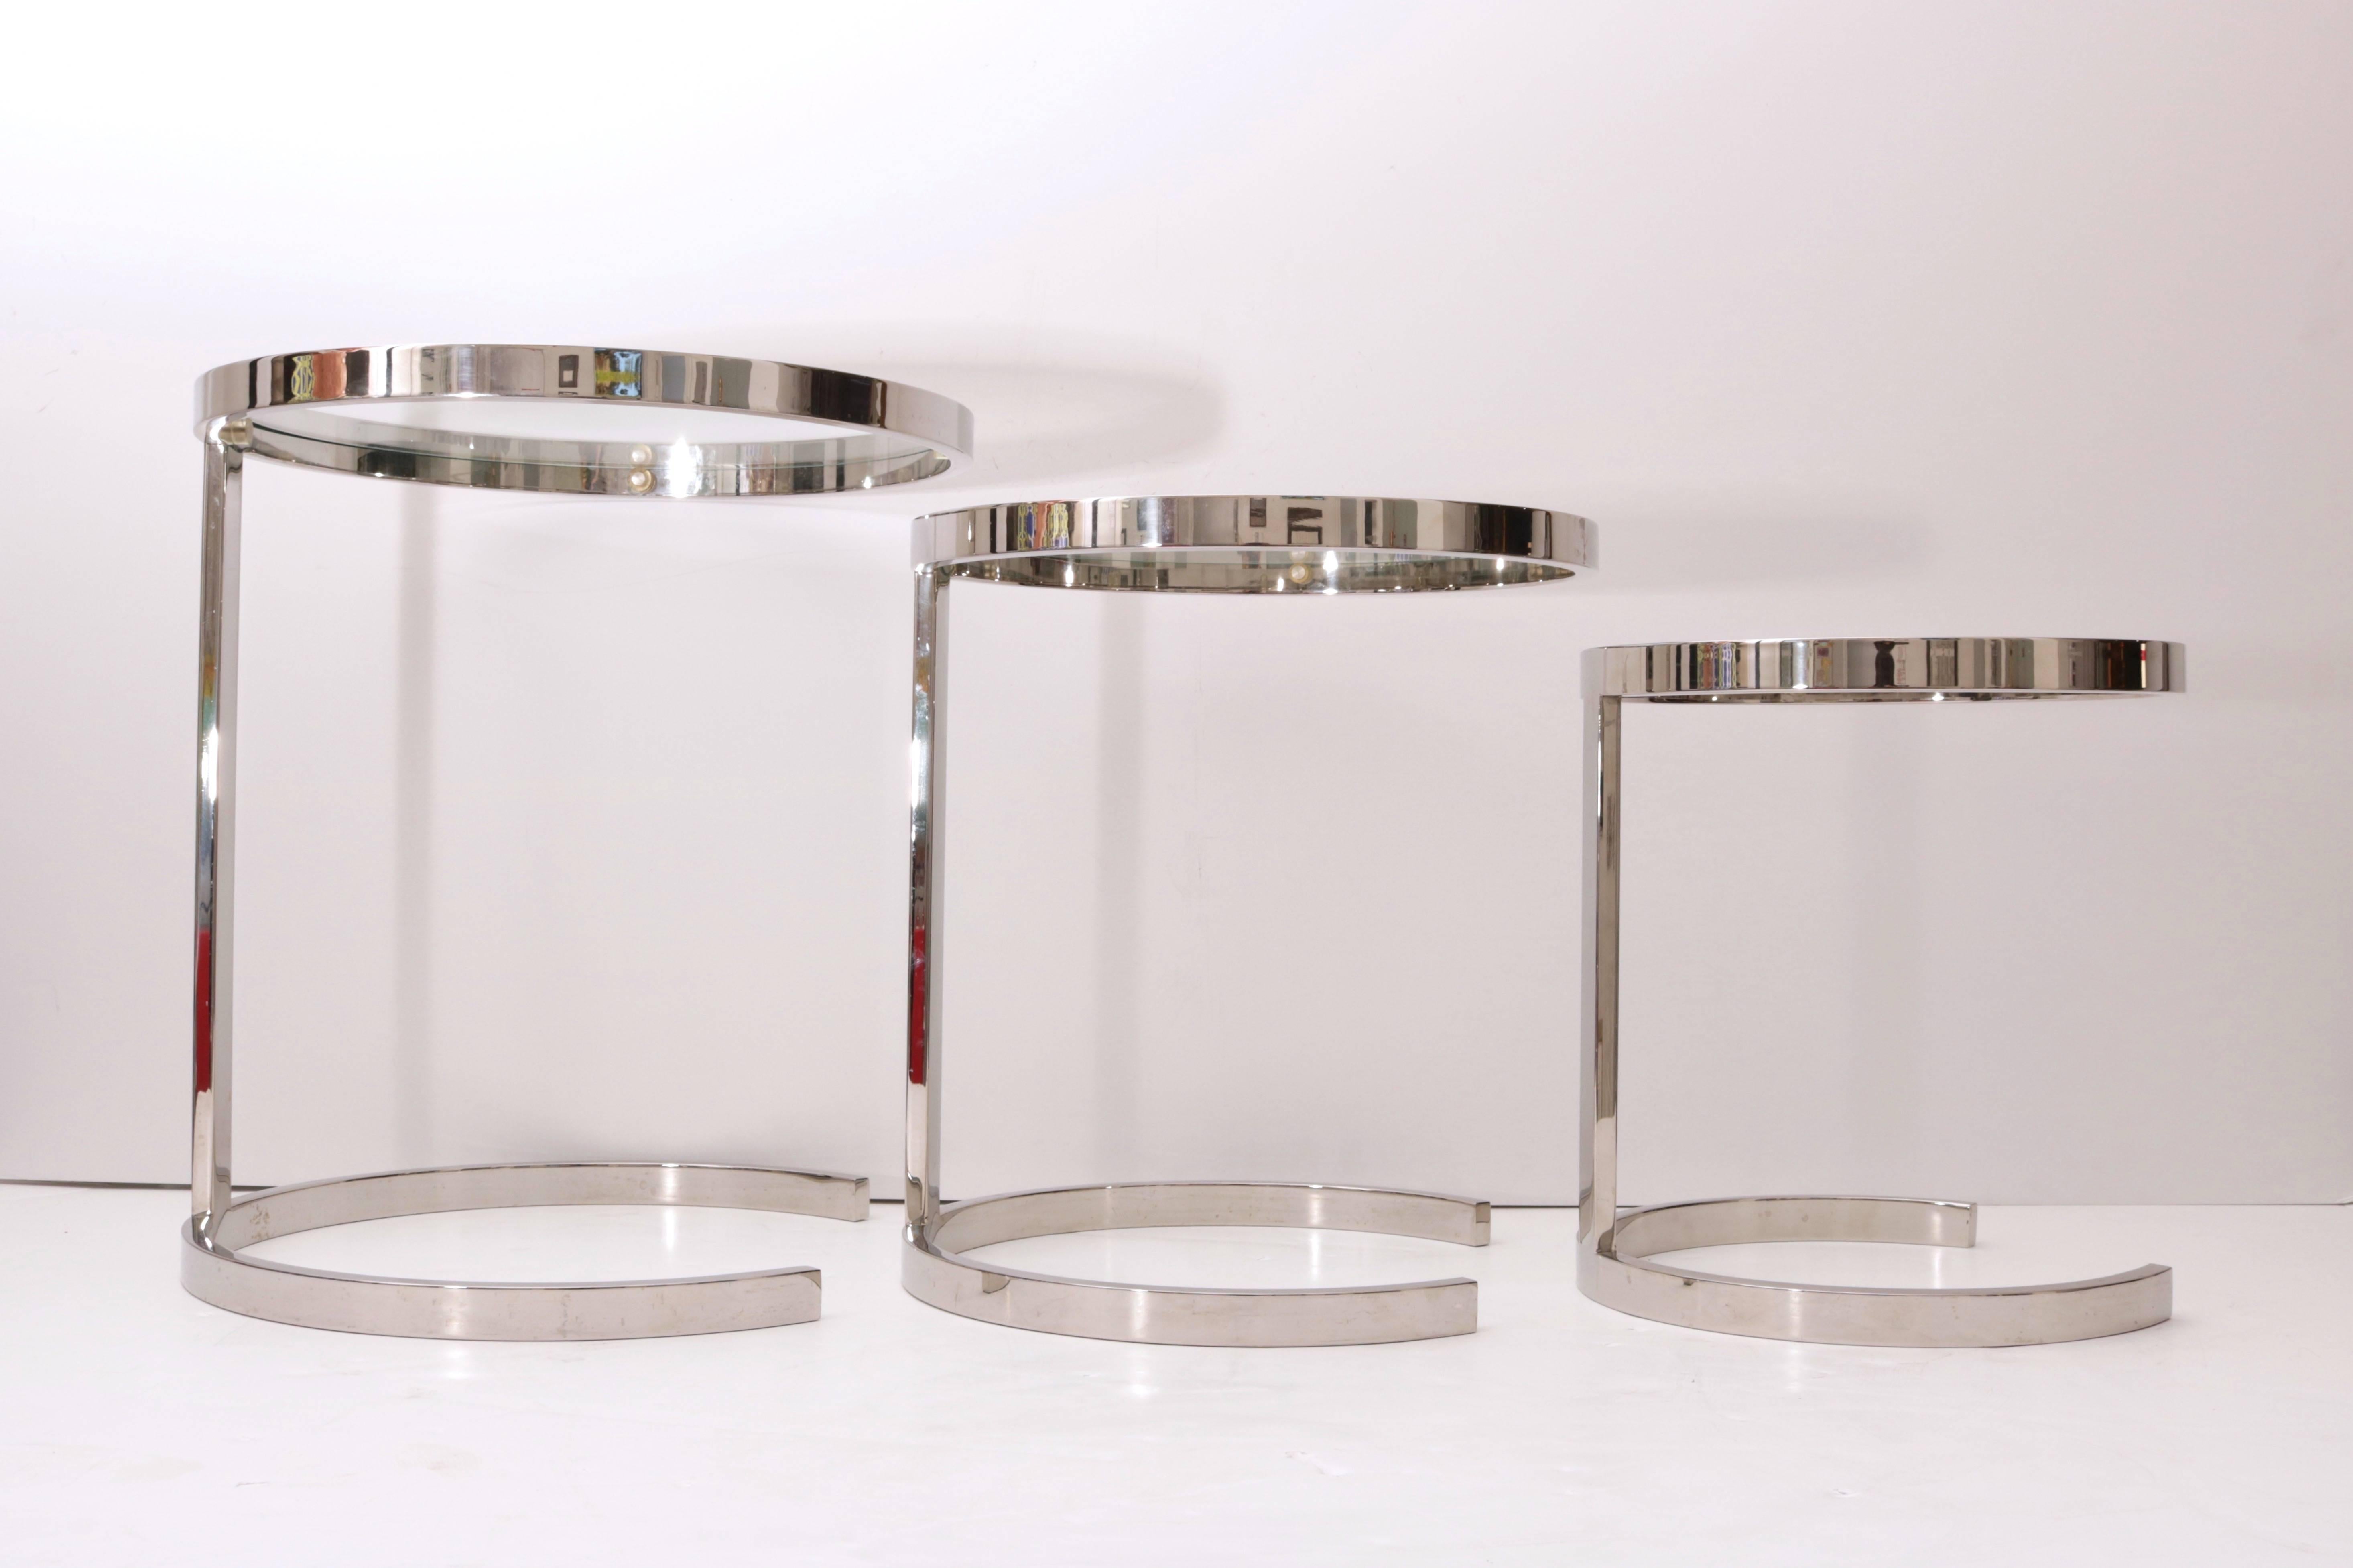 American Brueton, Set of Three Nesting Tables in Polished Steel and Glass